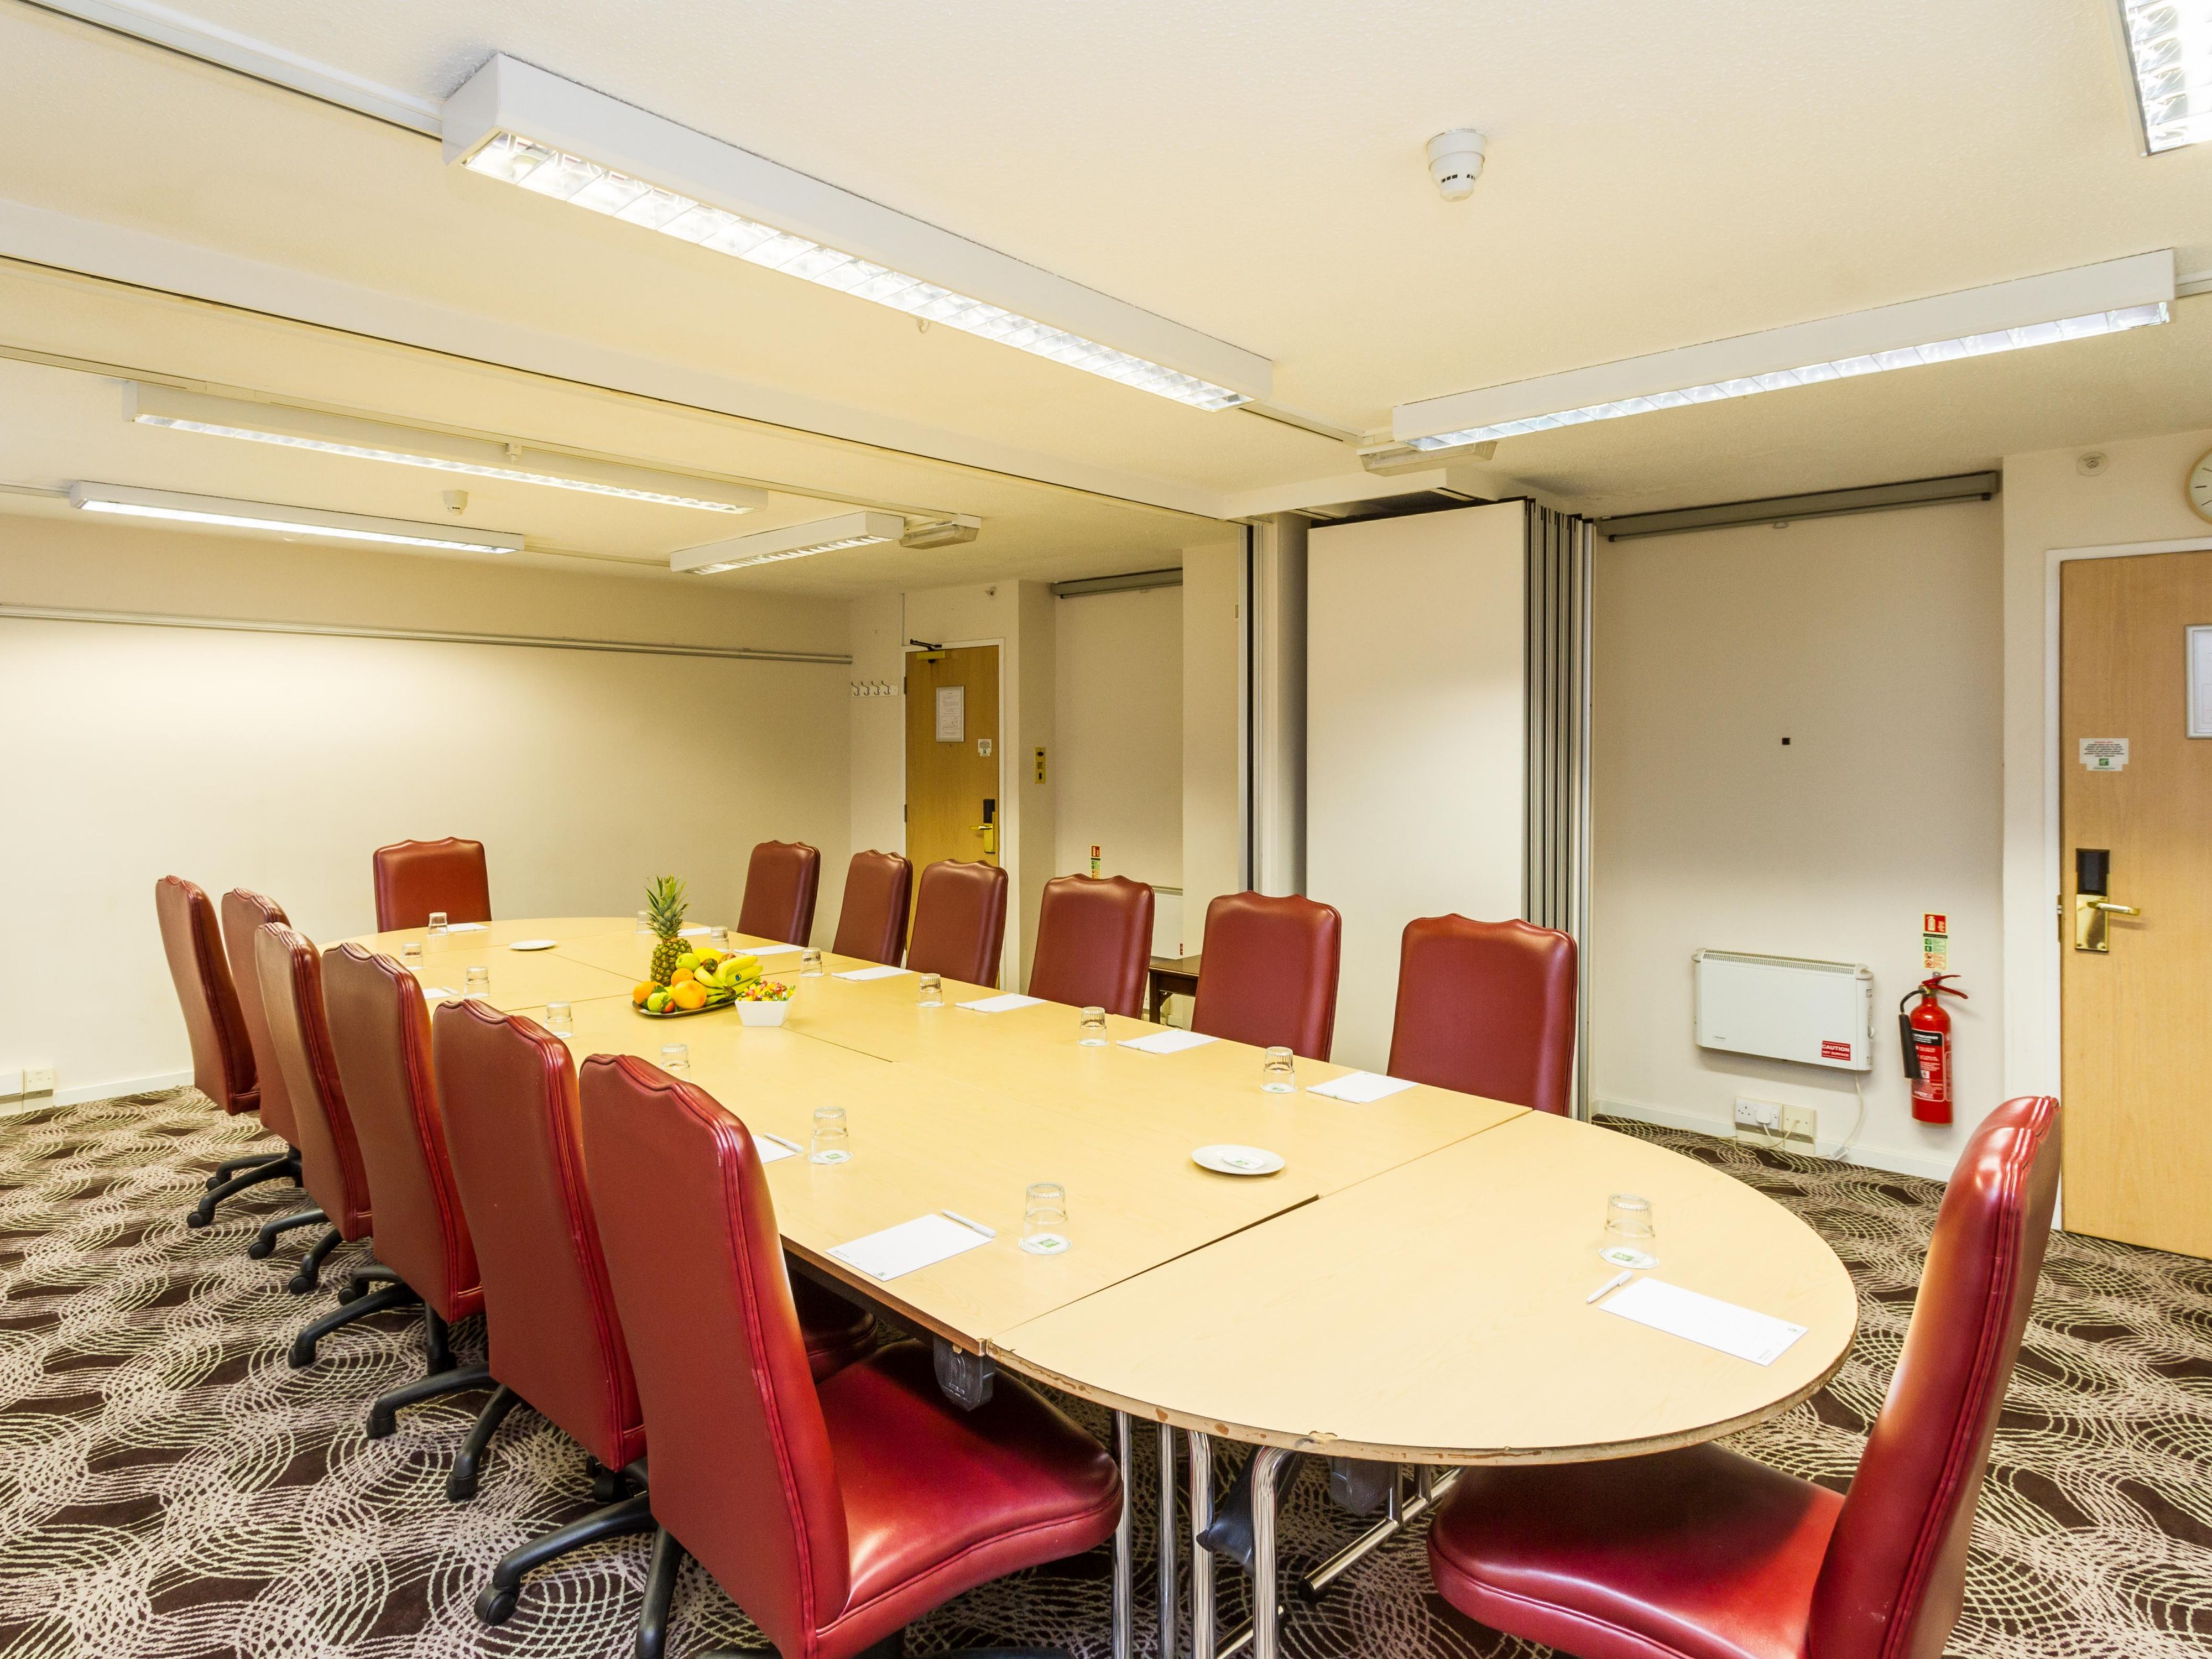 We have a range of meeting and board rooms available to suit any corporate requirement. So, if you're looking for a productive meeting space in Lincoln for interviews, larger presentations or conferences, our hotel meeting facilities have it all. 

Simply call our Meetings experts at 01522 544244 to book your meeting space today.